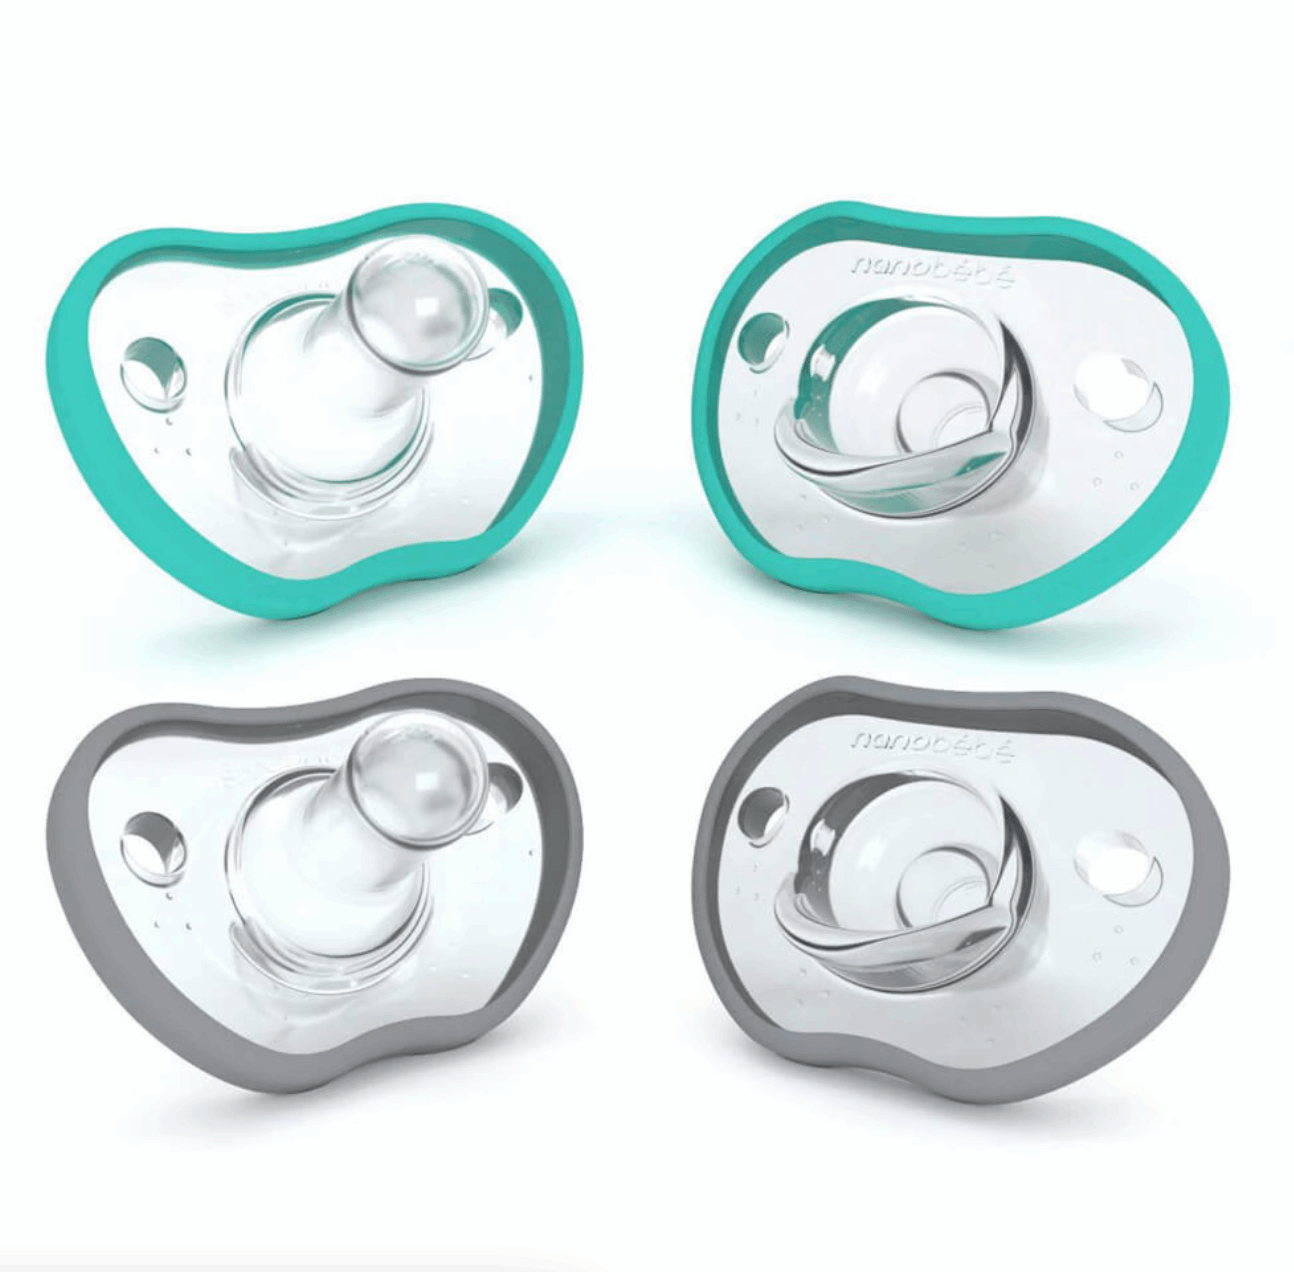 Nanobebe Flexy Pacifier Four-Pack 0-3 months TEAL - Tiny Tots Baby Store 